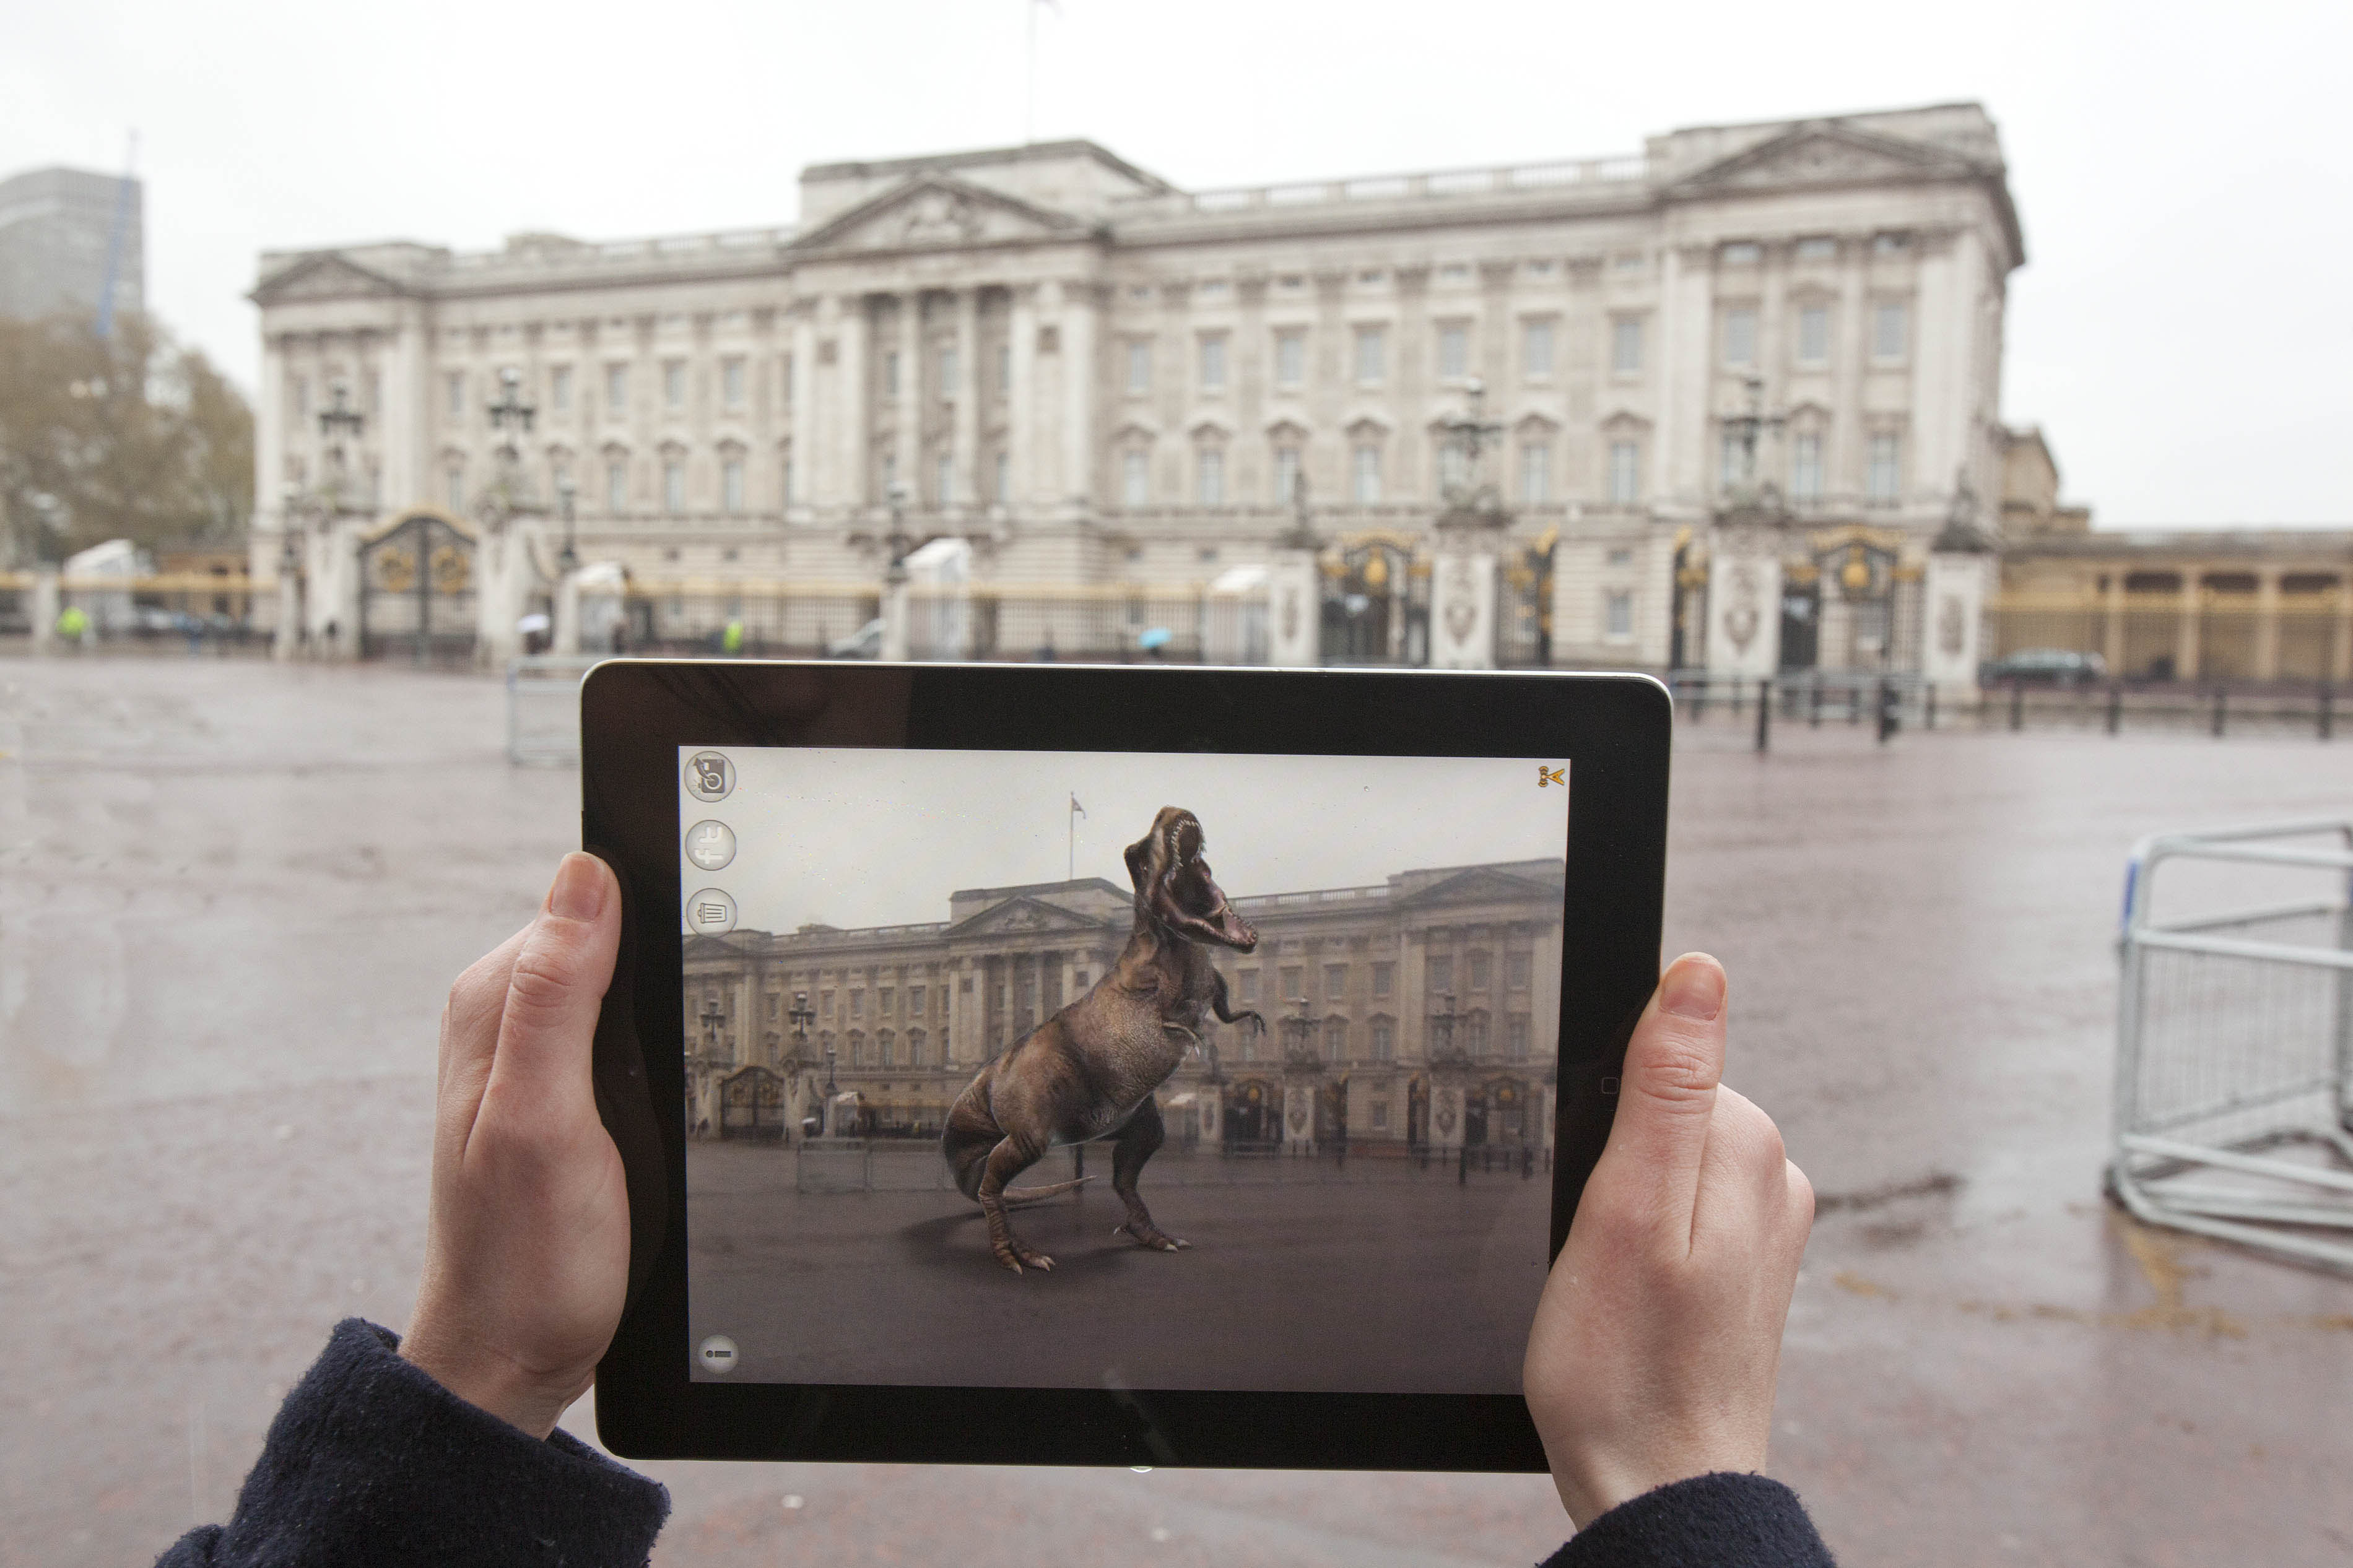 A T-Rex from Jurassic Park roars in front of Buckingham Palace. The entertainment and advertising industries have been working augmented reality into promotions and videos for several years with hopes to expand. In 2015, a Jurassic Augmented Reality experience thrilled audiences at Universal Studios in Orlando. Photo Credit: Universal Pictures and Aurasma